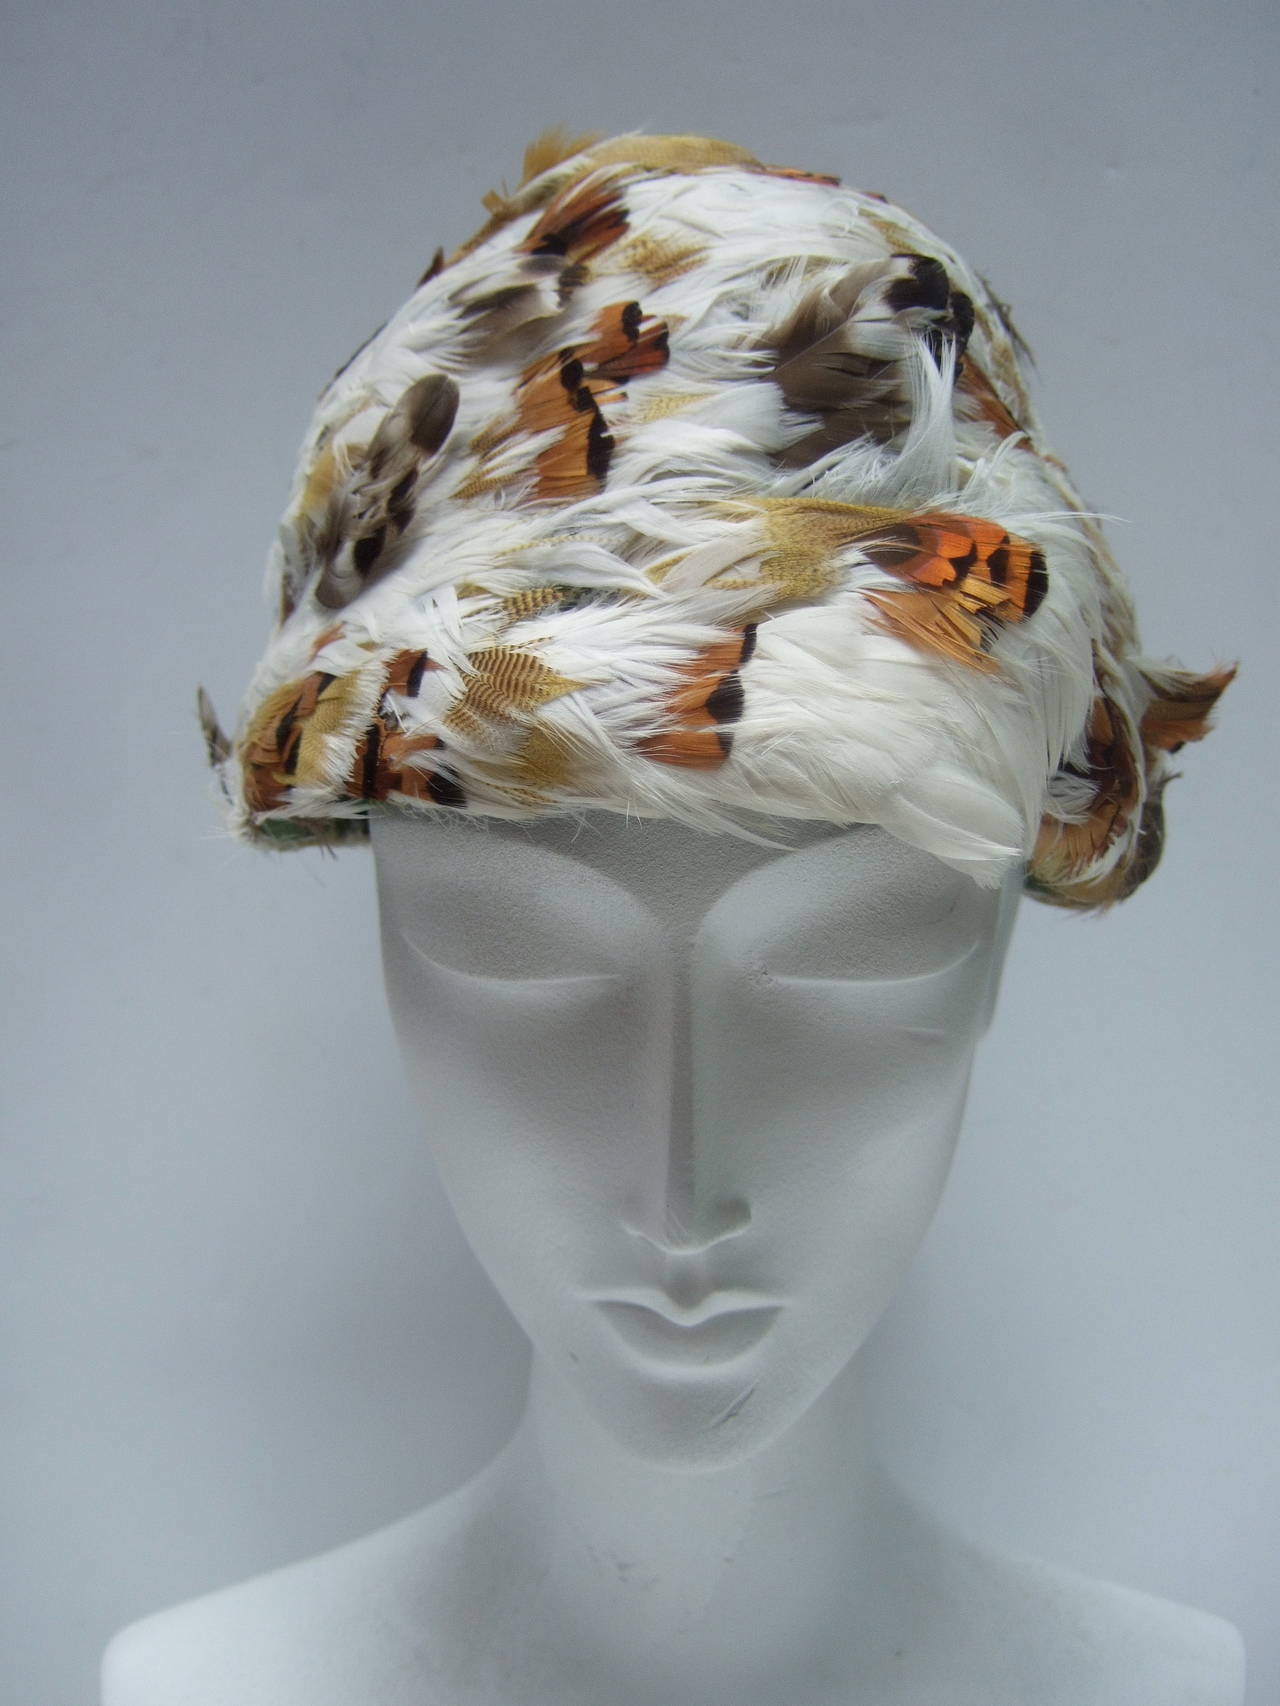 Schiaparelli Exotic feather dome hat Made in Italy c 1950
The chic retro is hat embellished with a myriad of white,
golden yellow & brown feathers 

Labeled Schiaparelli Paris Made in Italy 

The interior base of the hat is moss green 
felt